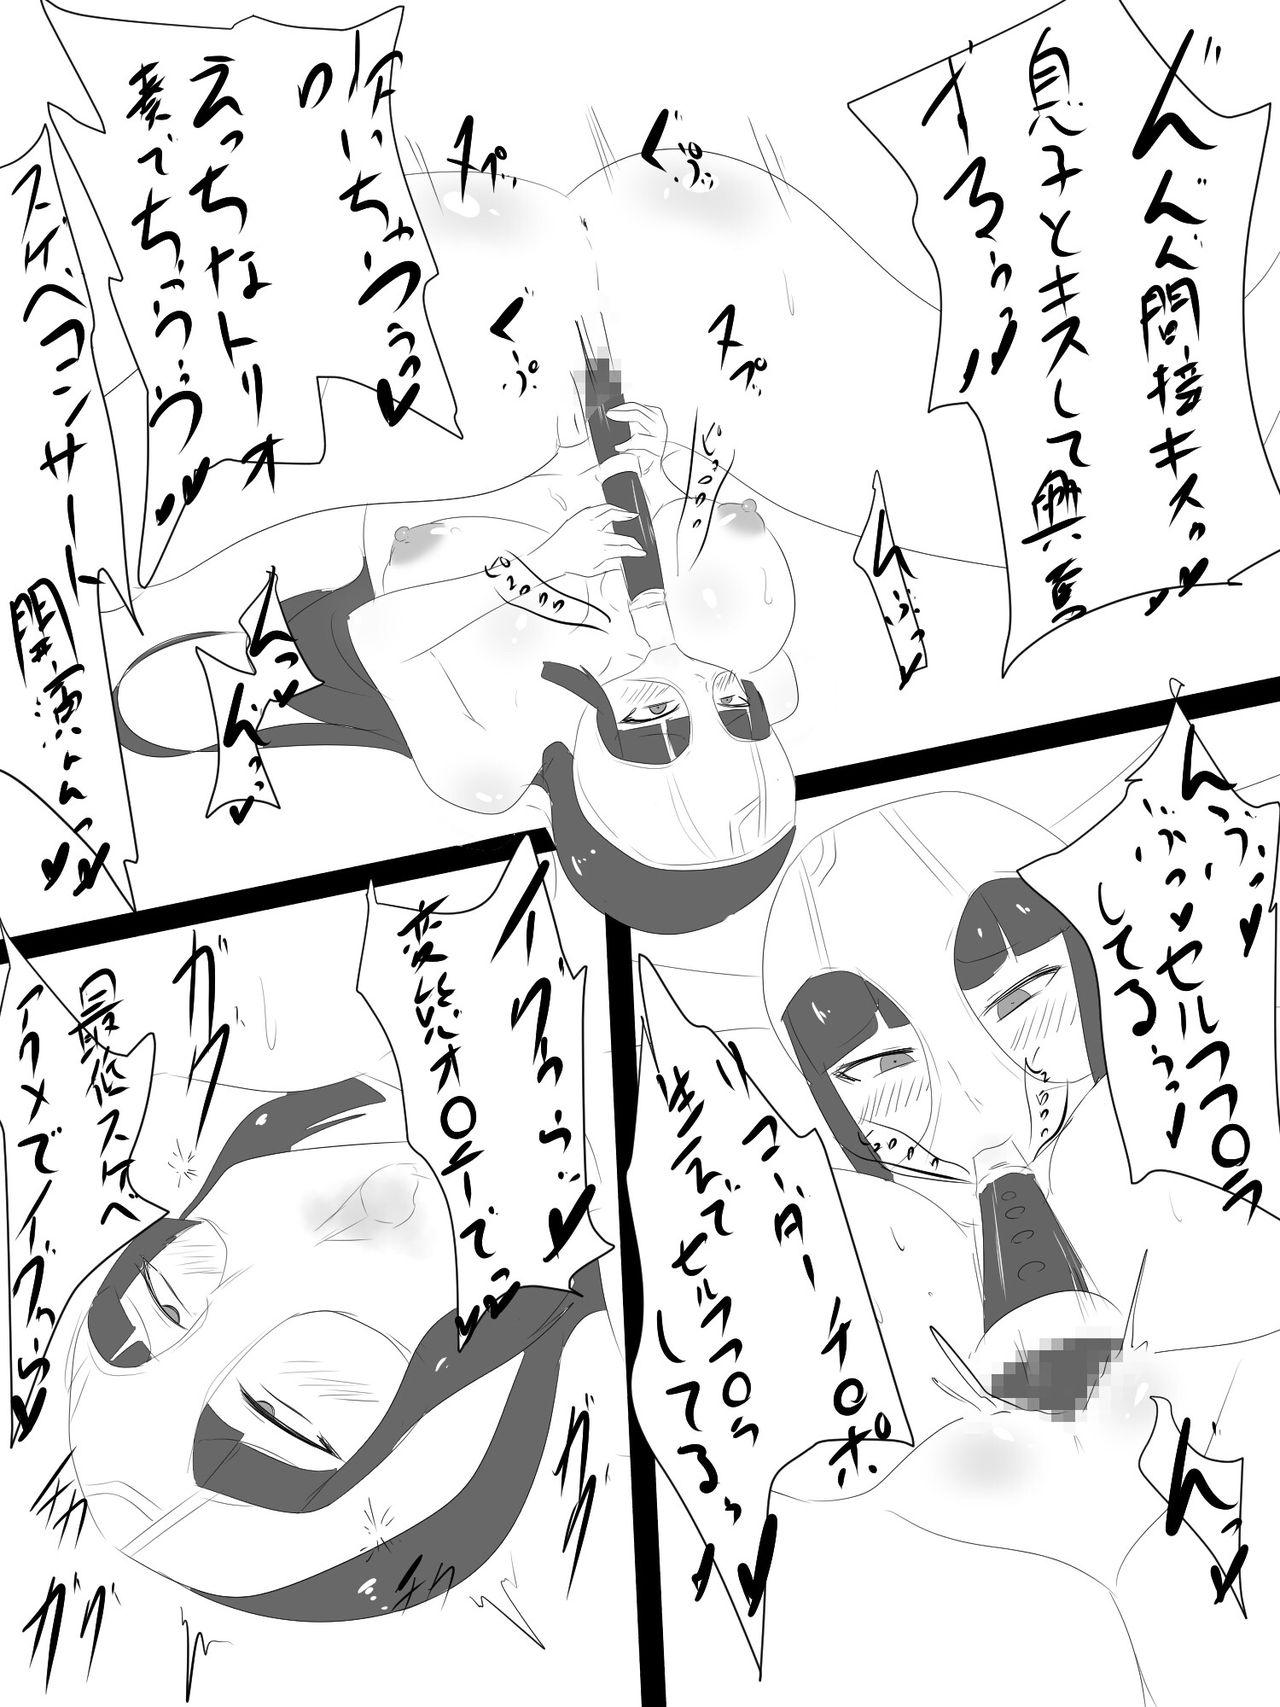 Sixtynine 変態ママオナニー漫画 - Original Yanks Featured - Picture 3